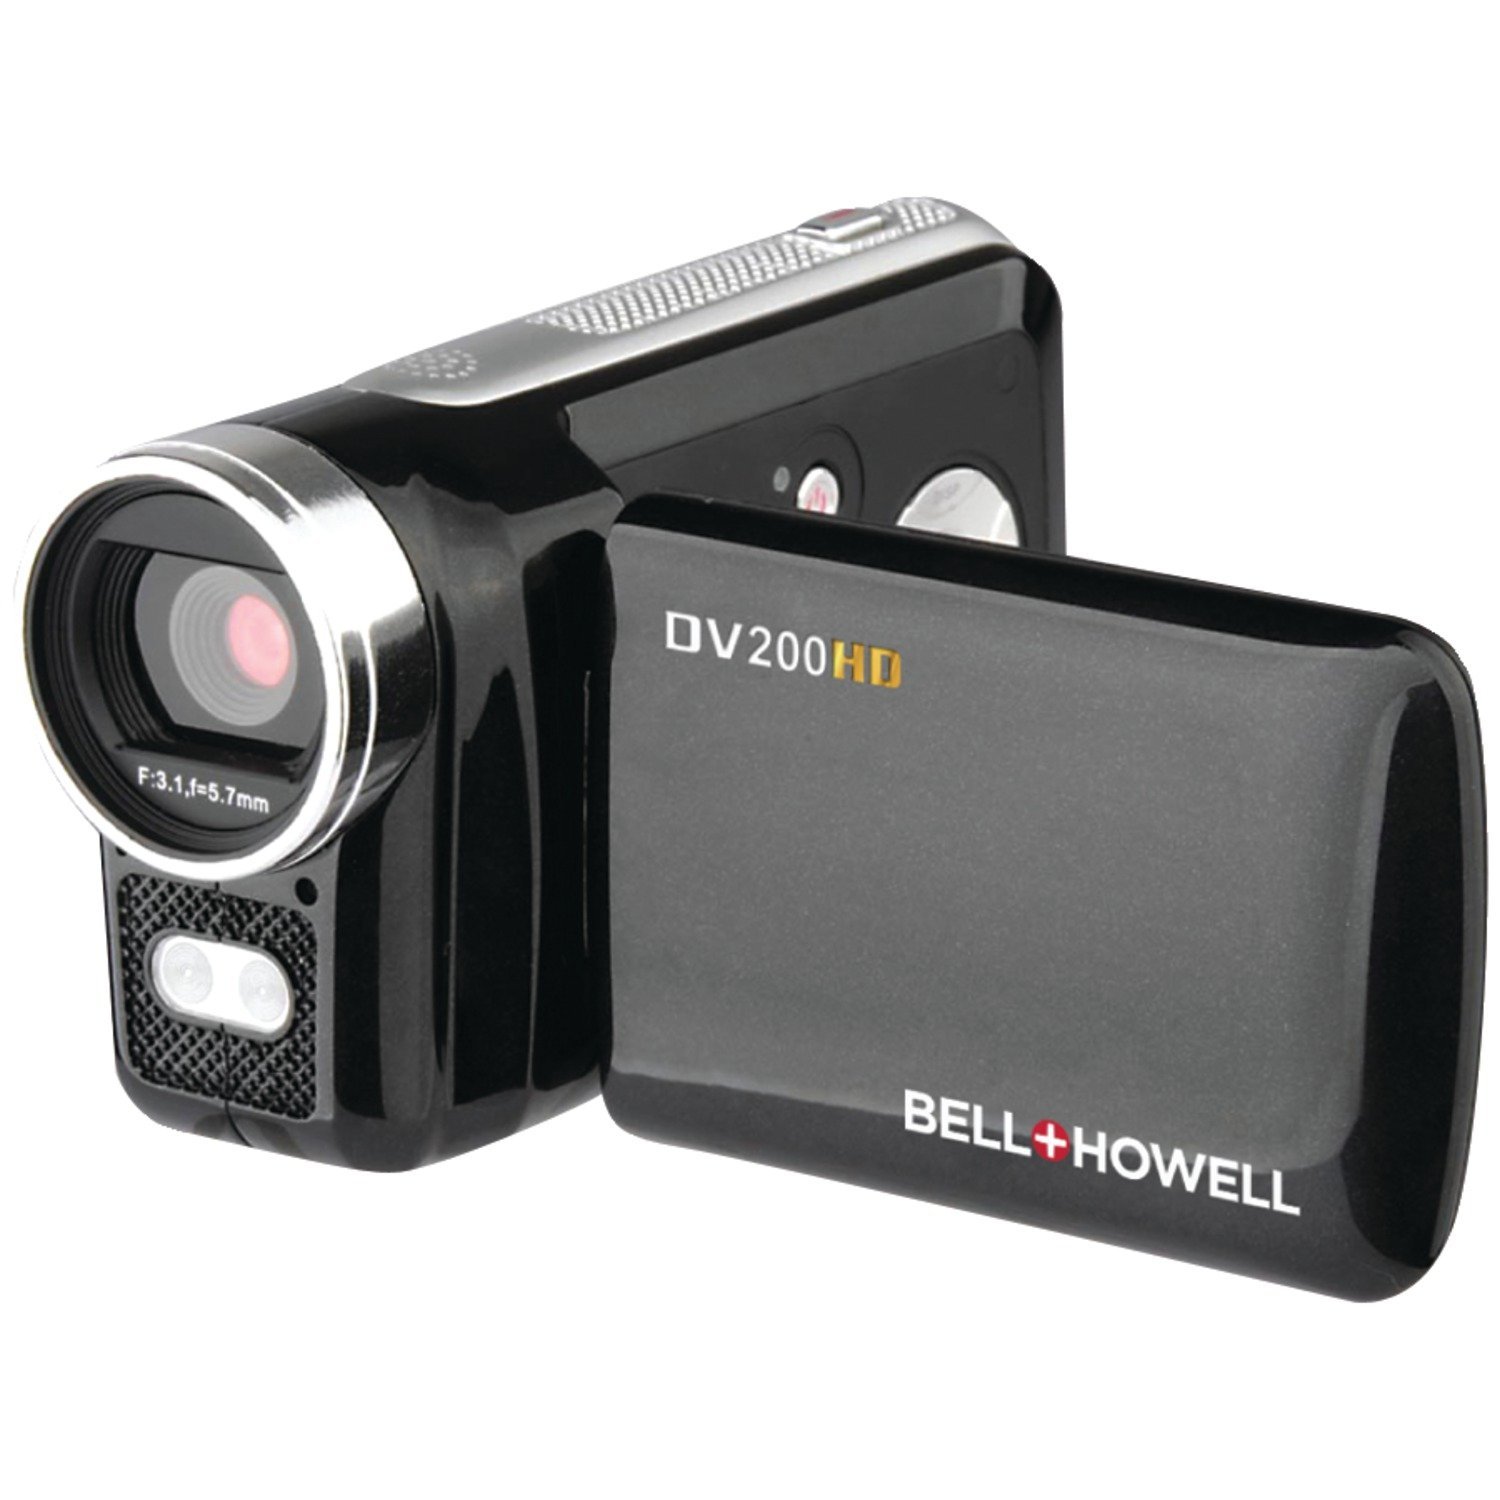 Amazon.com : Bell + Howell DV200HD Digital Camera with 2-Inch LCD ...